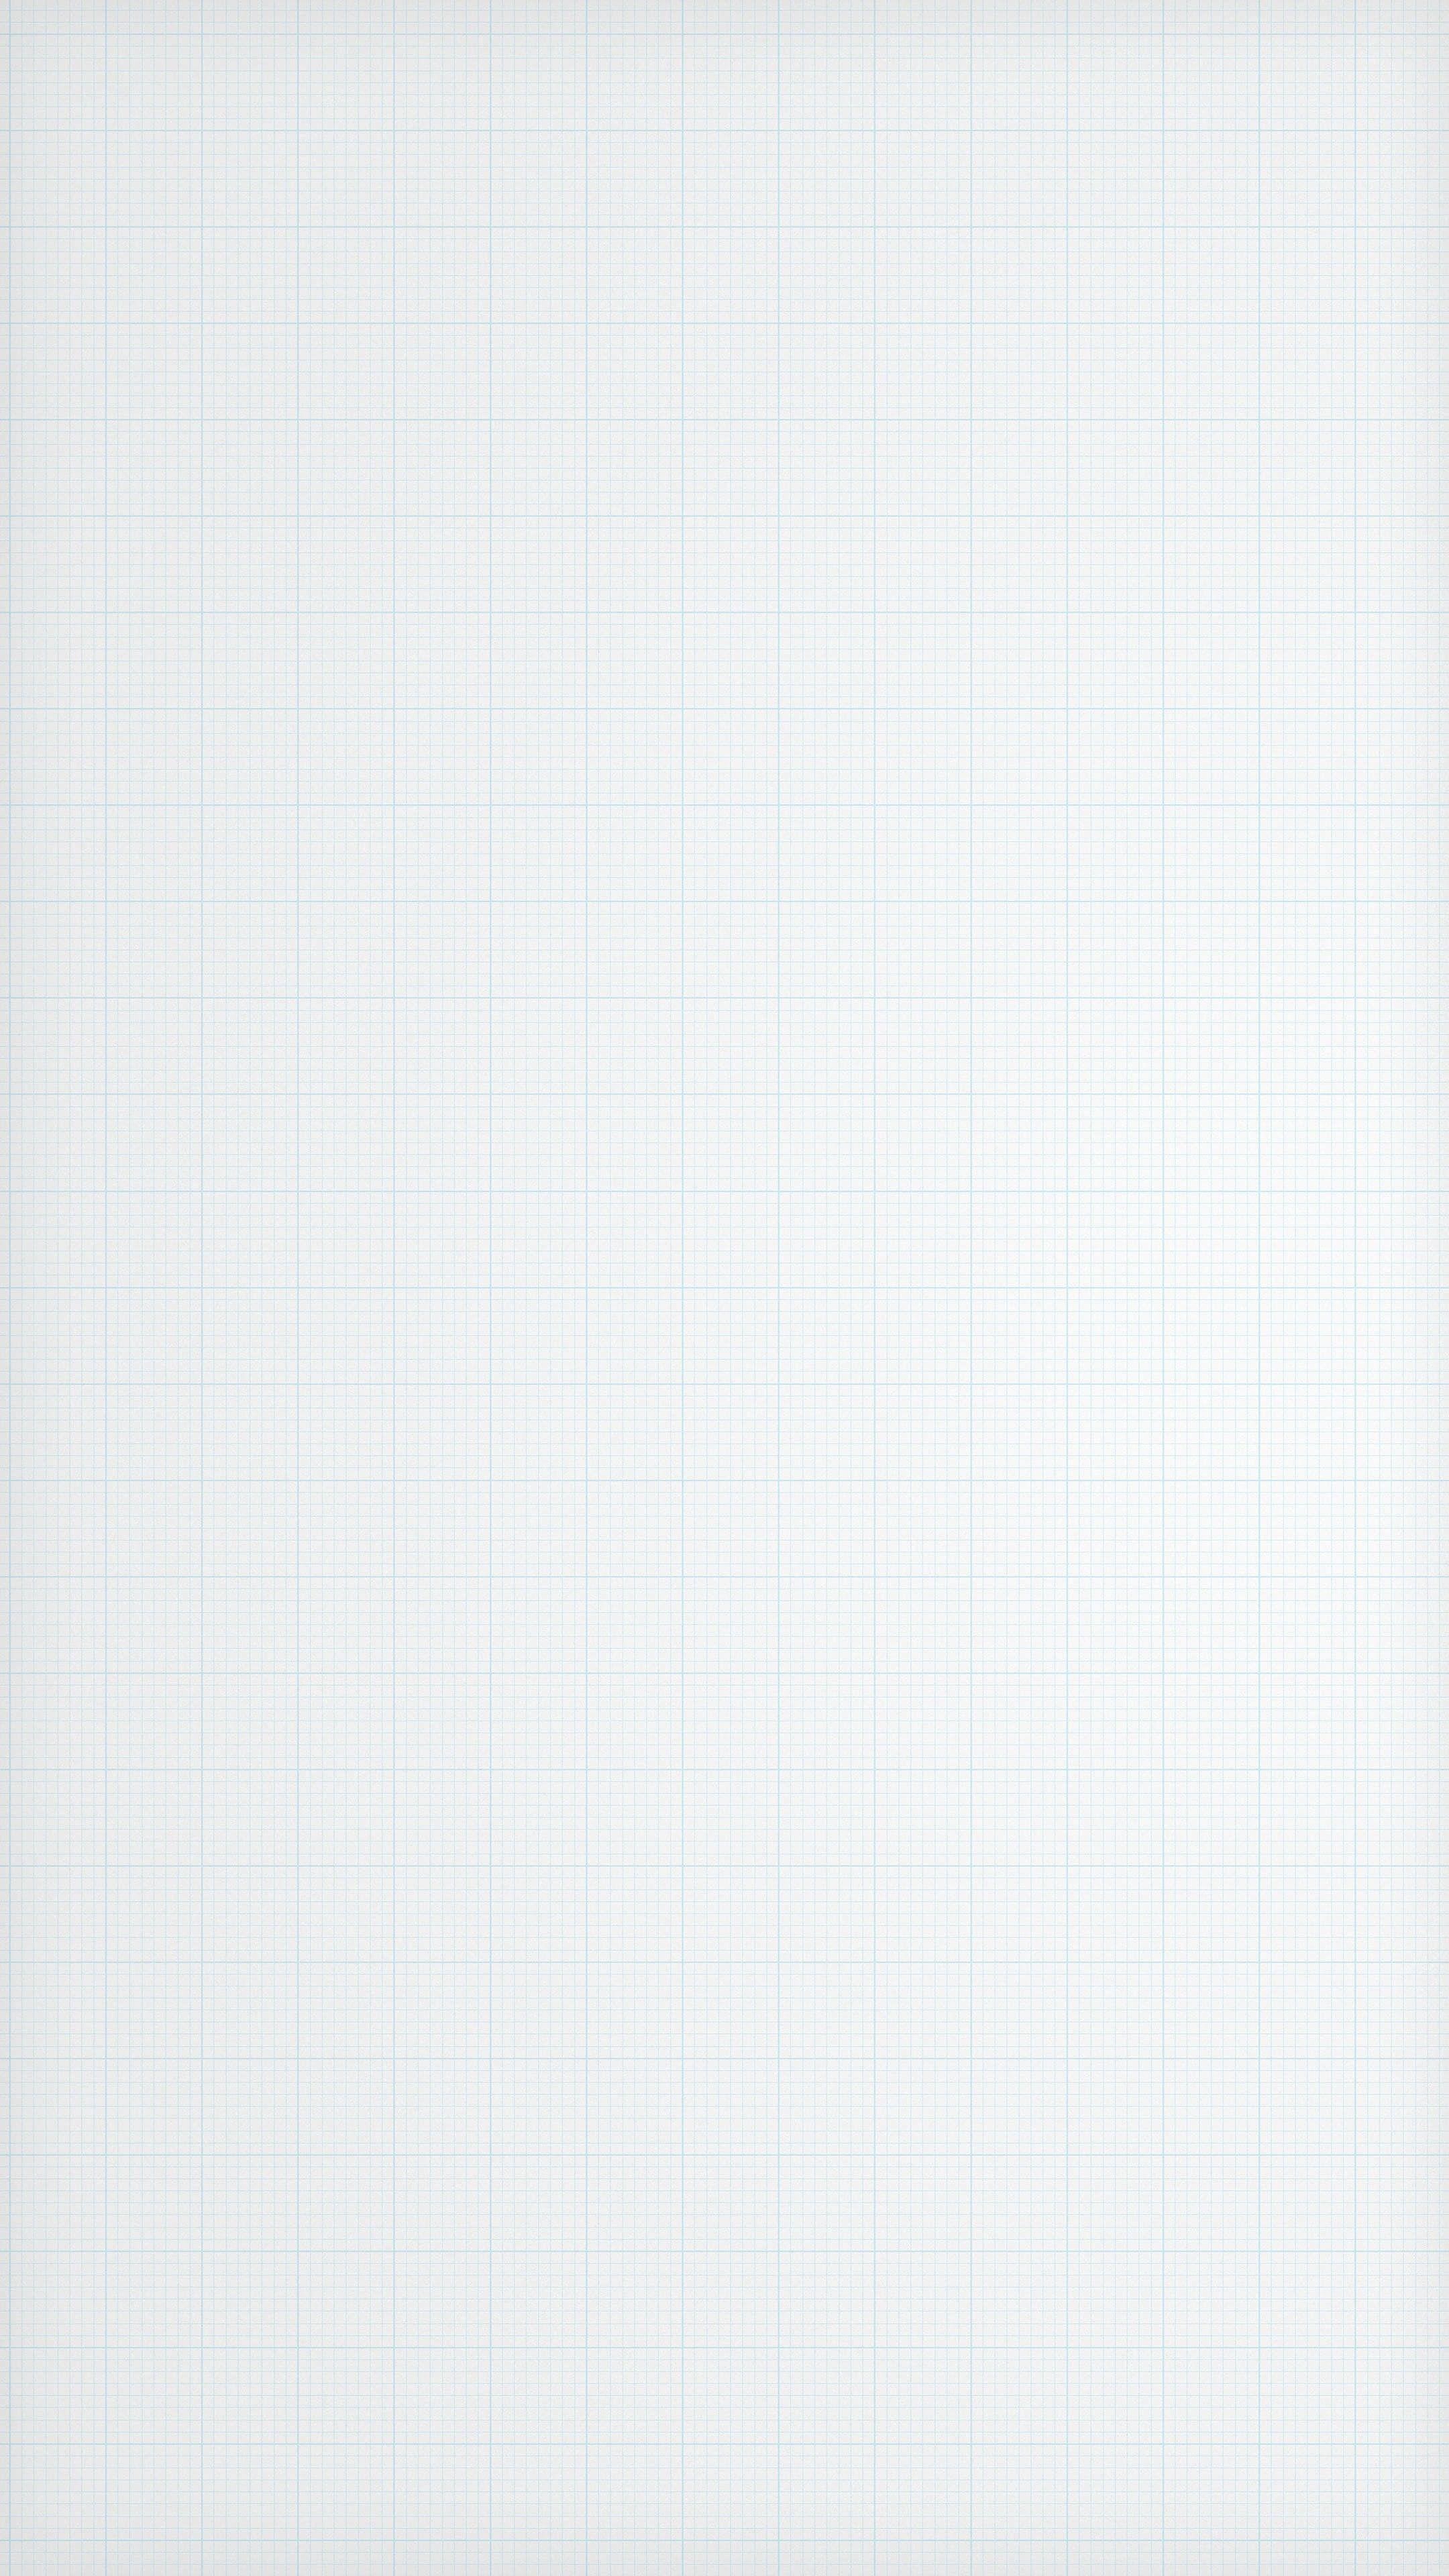 Graph Paper: Logarithmic sheet, Geometrography, Parallels. 2160x3840 4K Background.